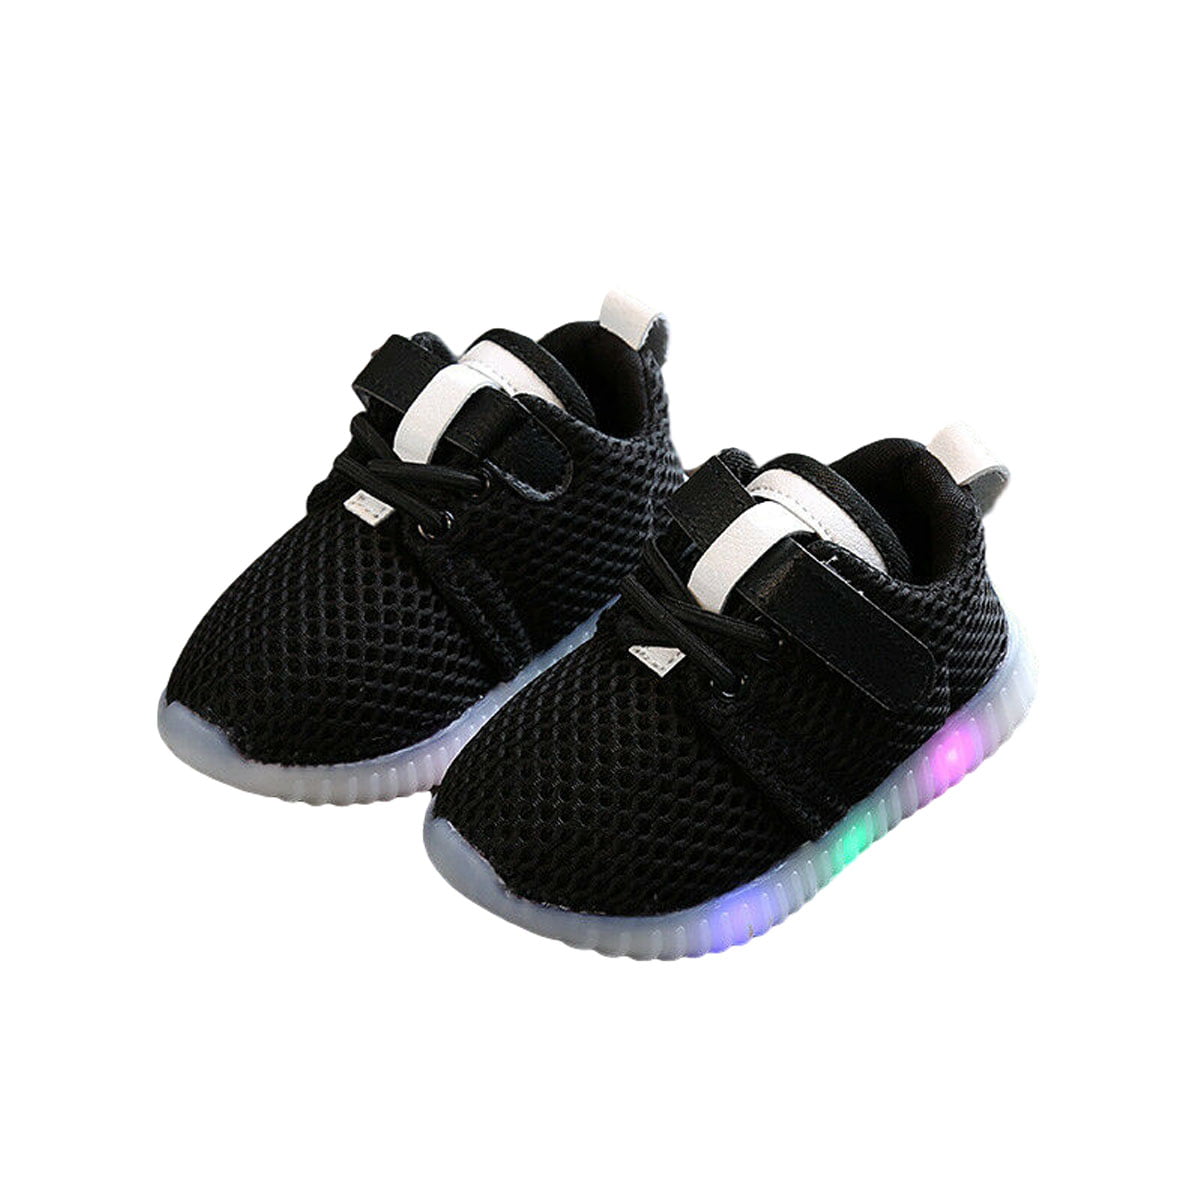 Toddler Baby Girl LED Luminous Sandals Soft Leather Summer Shoes Casual Sneakers 